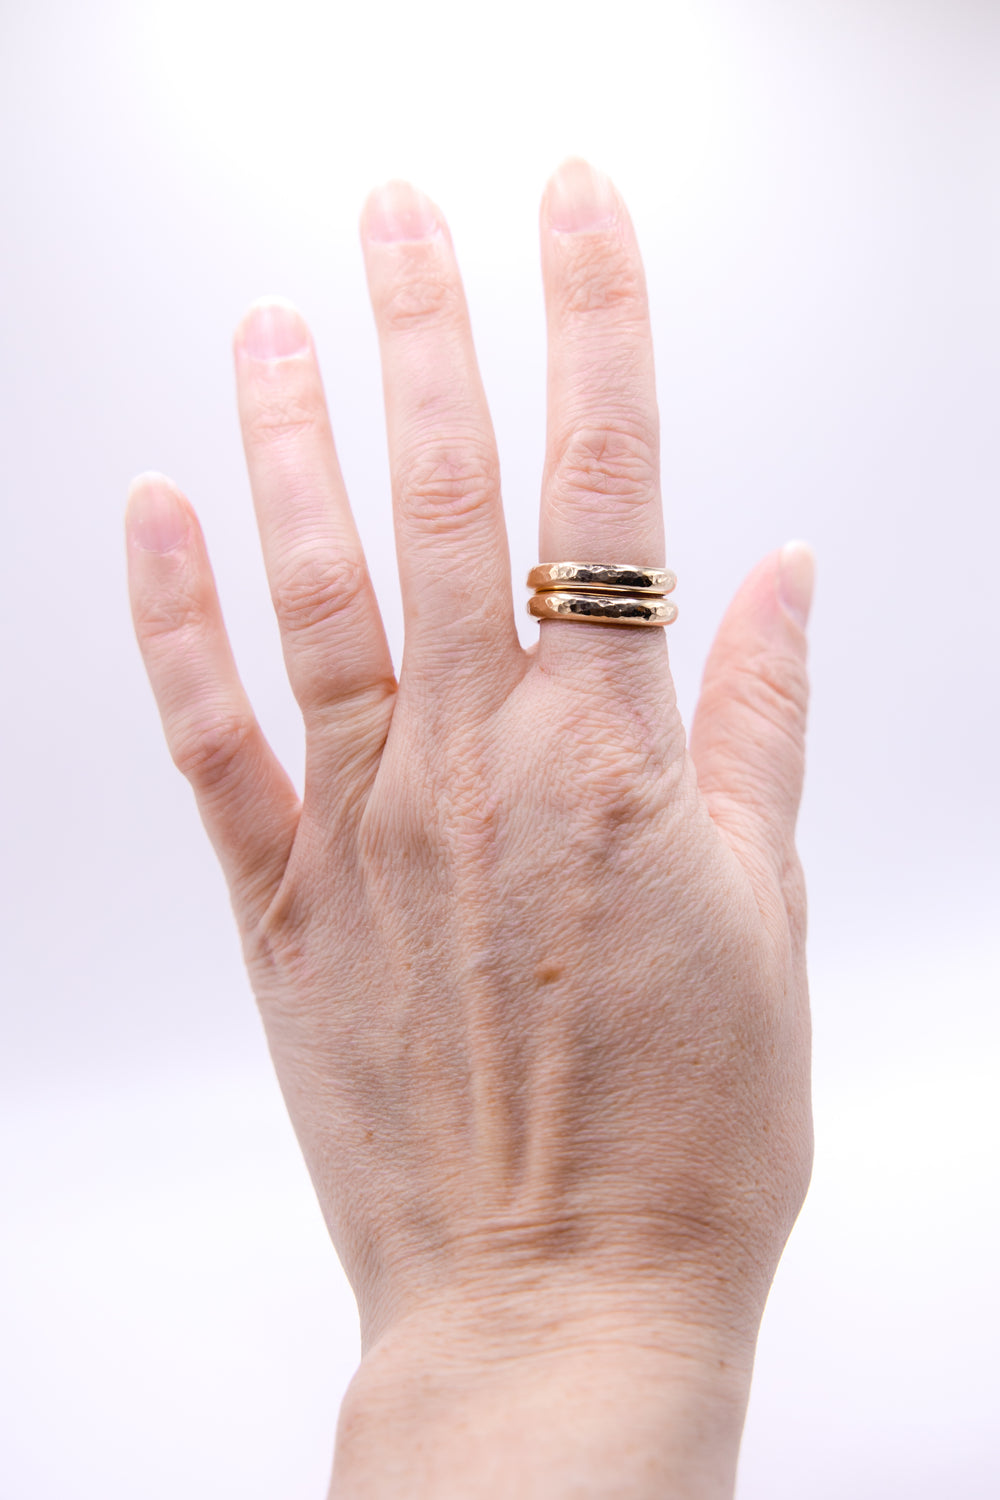 Handmade wrap gold hammered ring by Anna Shae Jewelry in Lexington, Kentucky